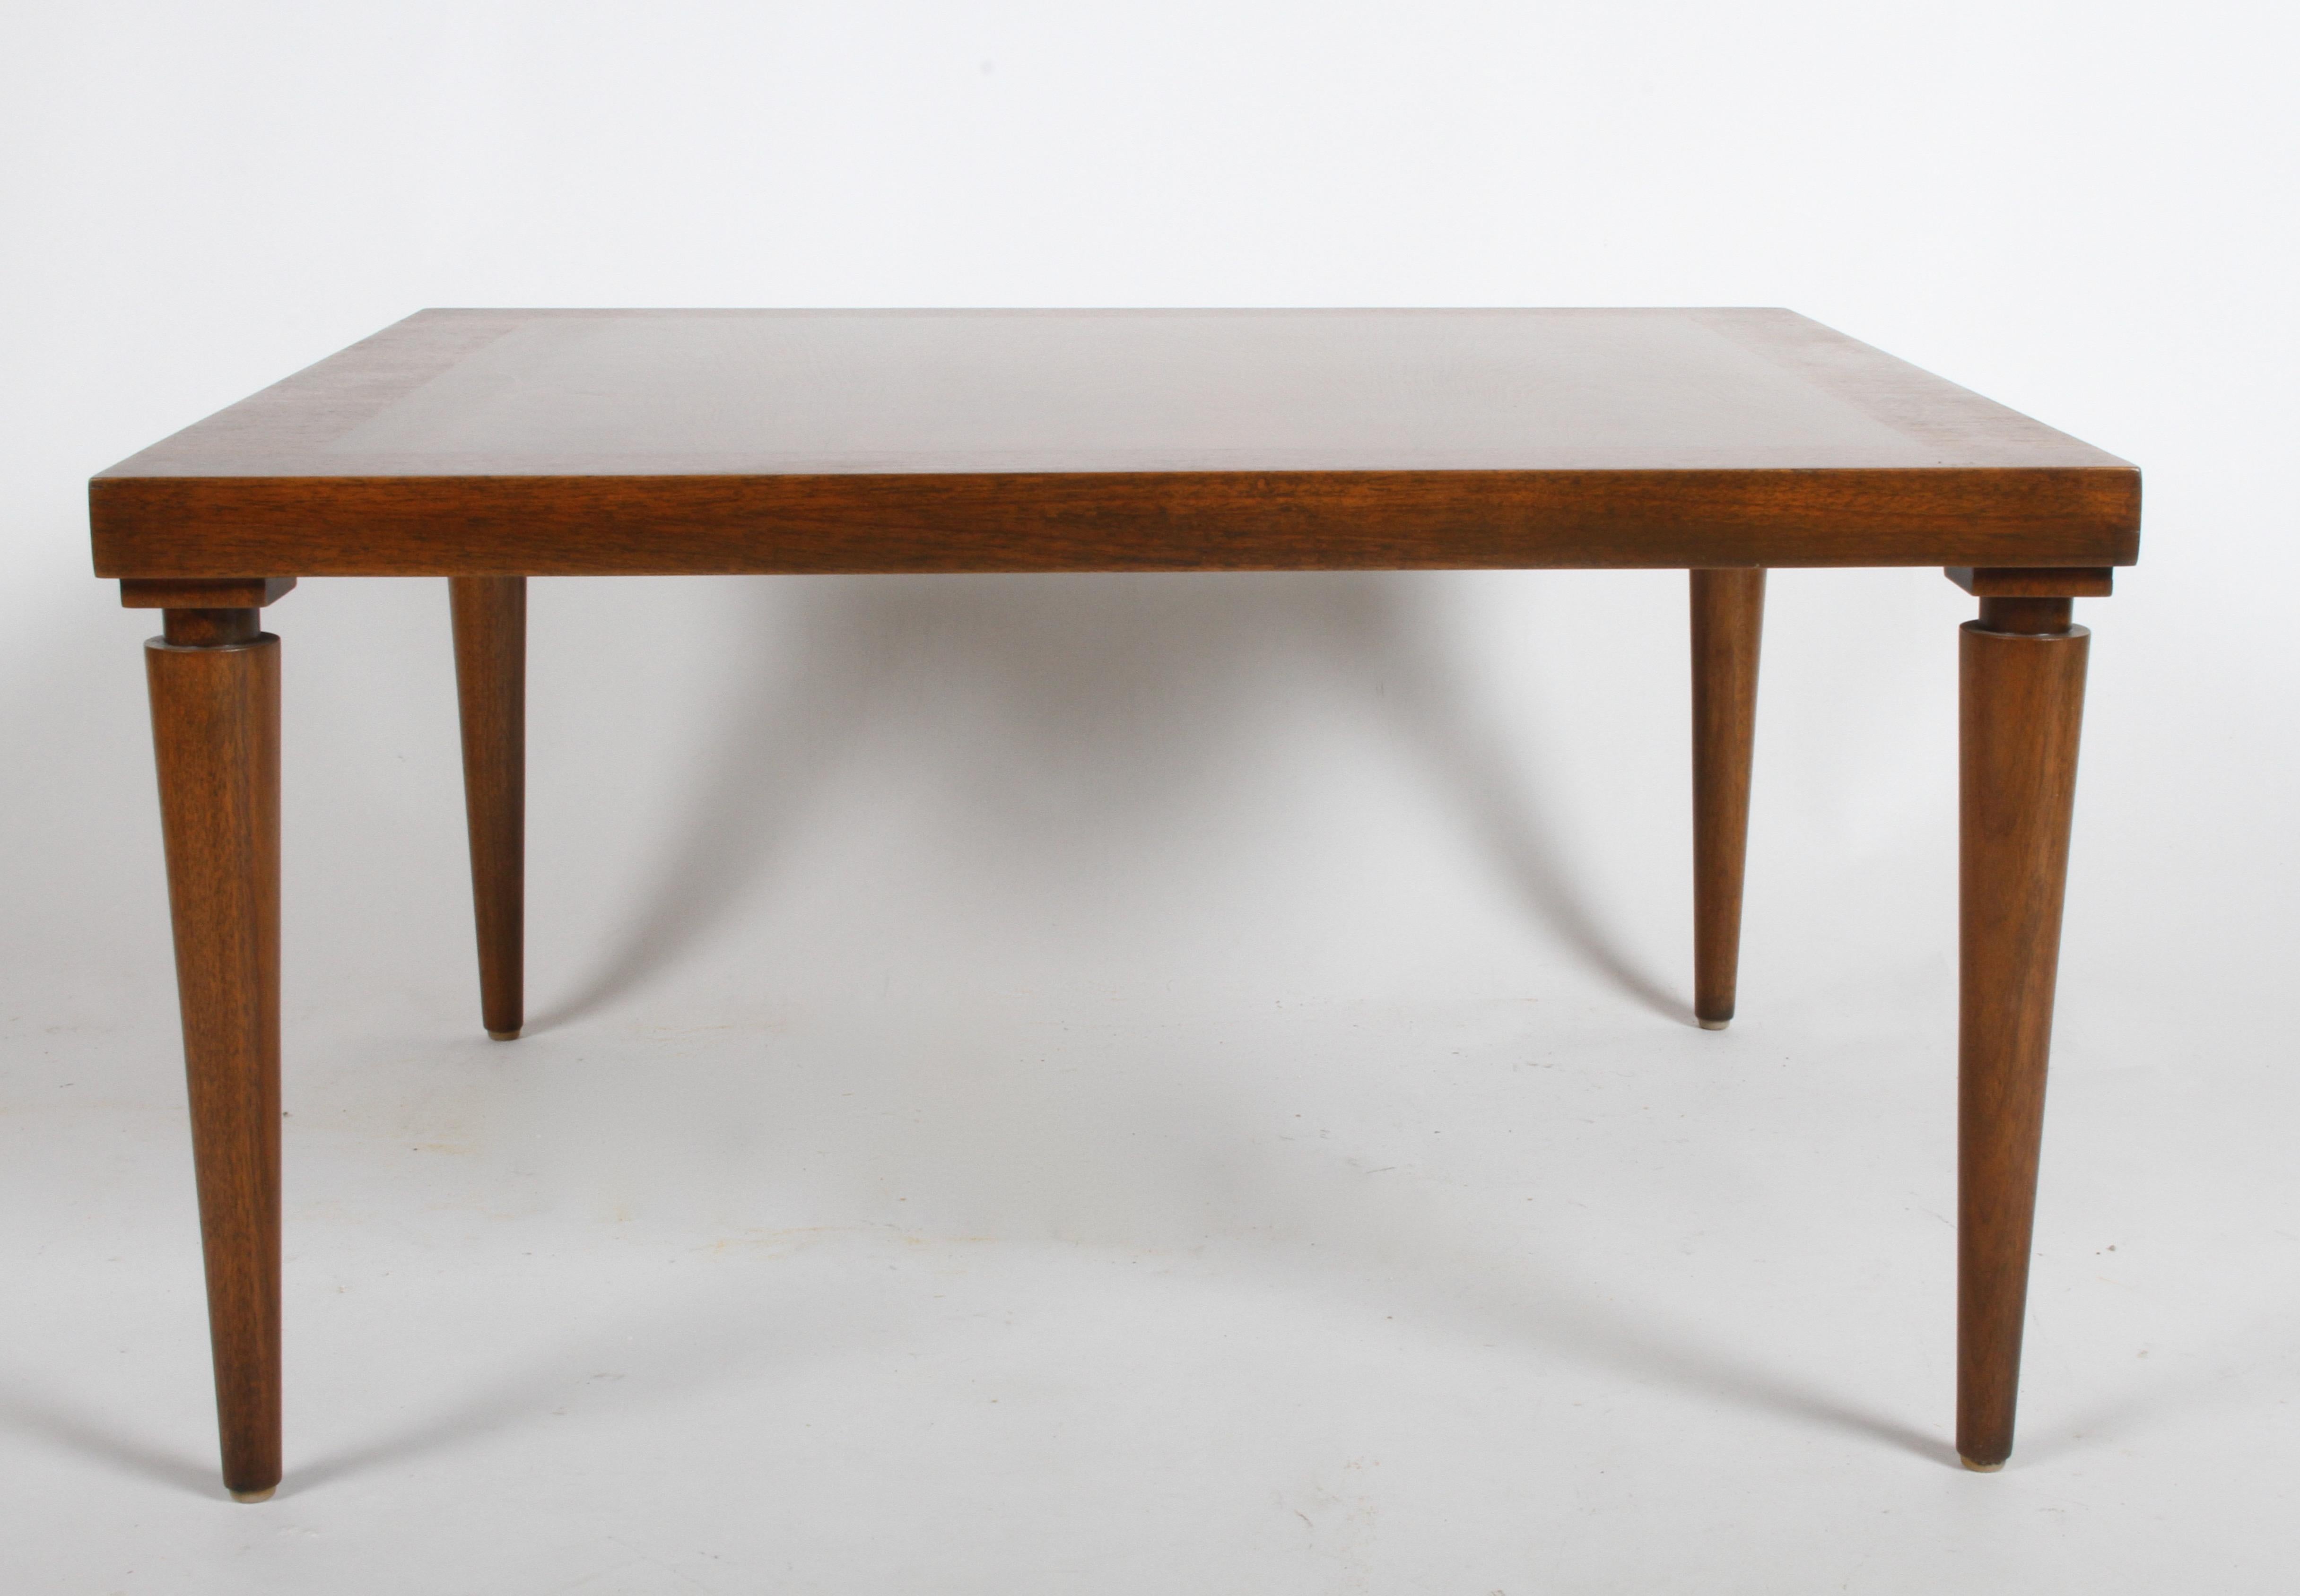 Elegant and not very common walnut table designed by T. H. Robsjohn-Gibbings for Widdicomb, rectangular table with tapered legs with notch in at top. Model 3348, label. Similar to his designs for Saridis. Refinished.